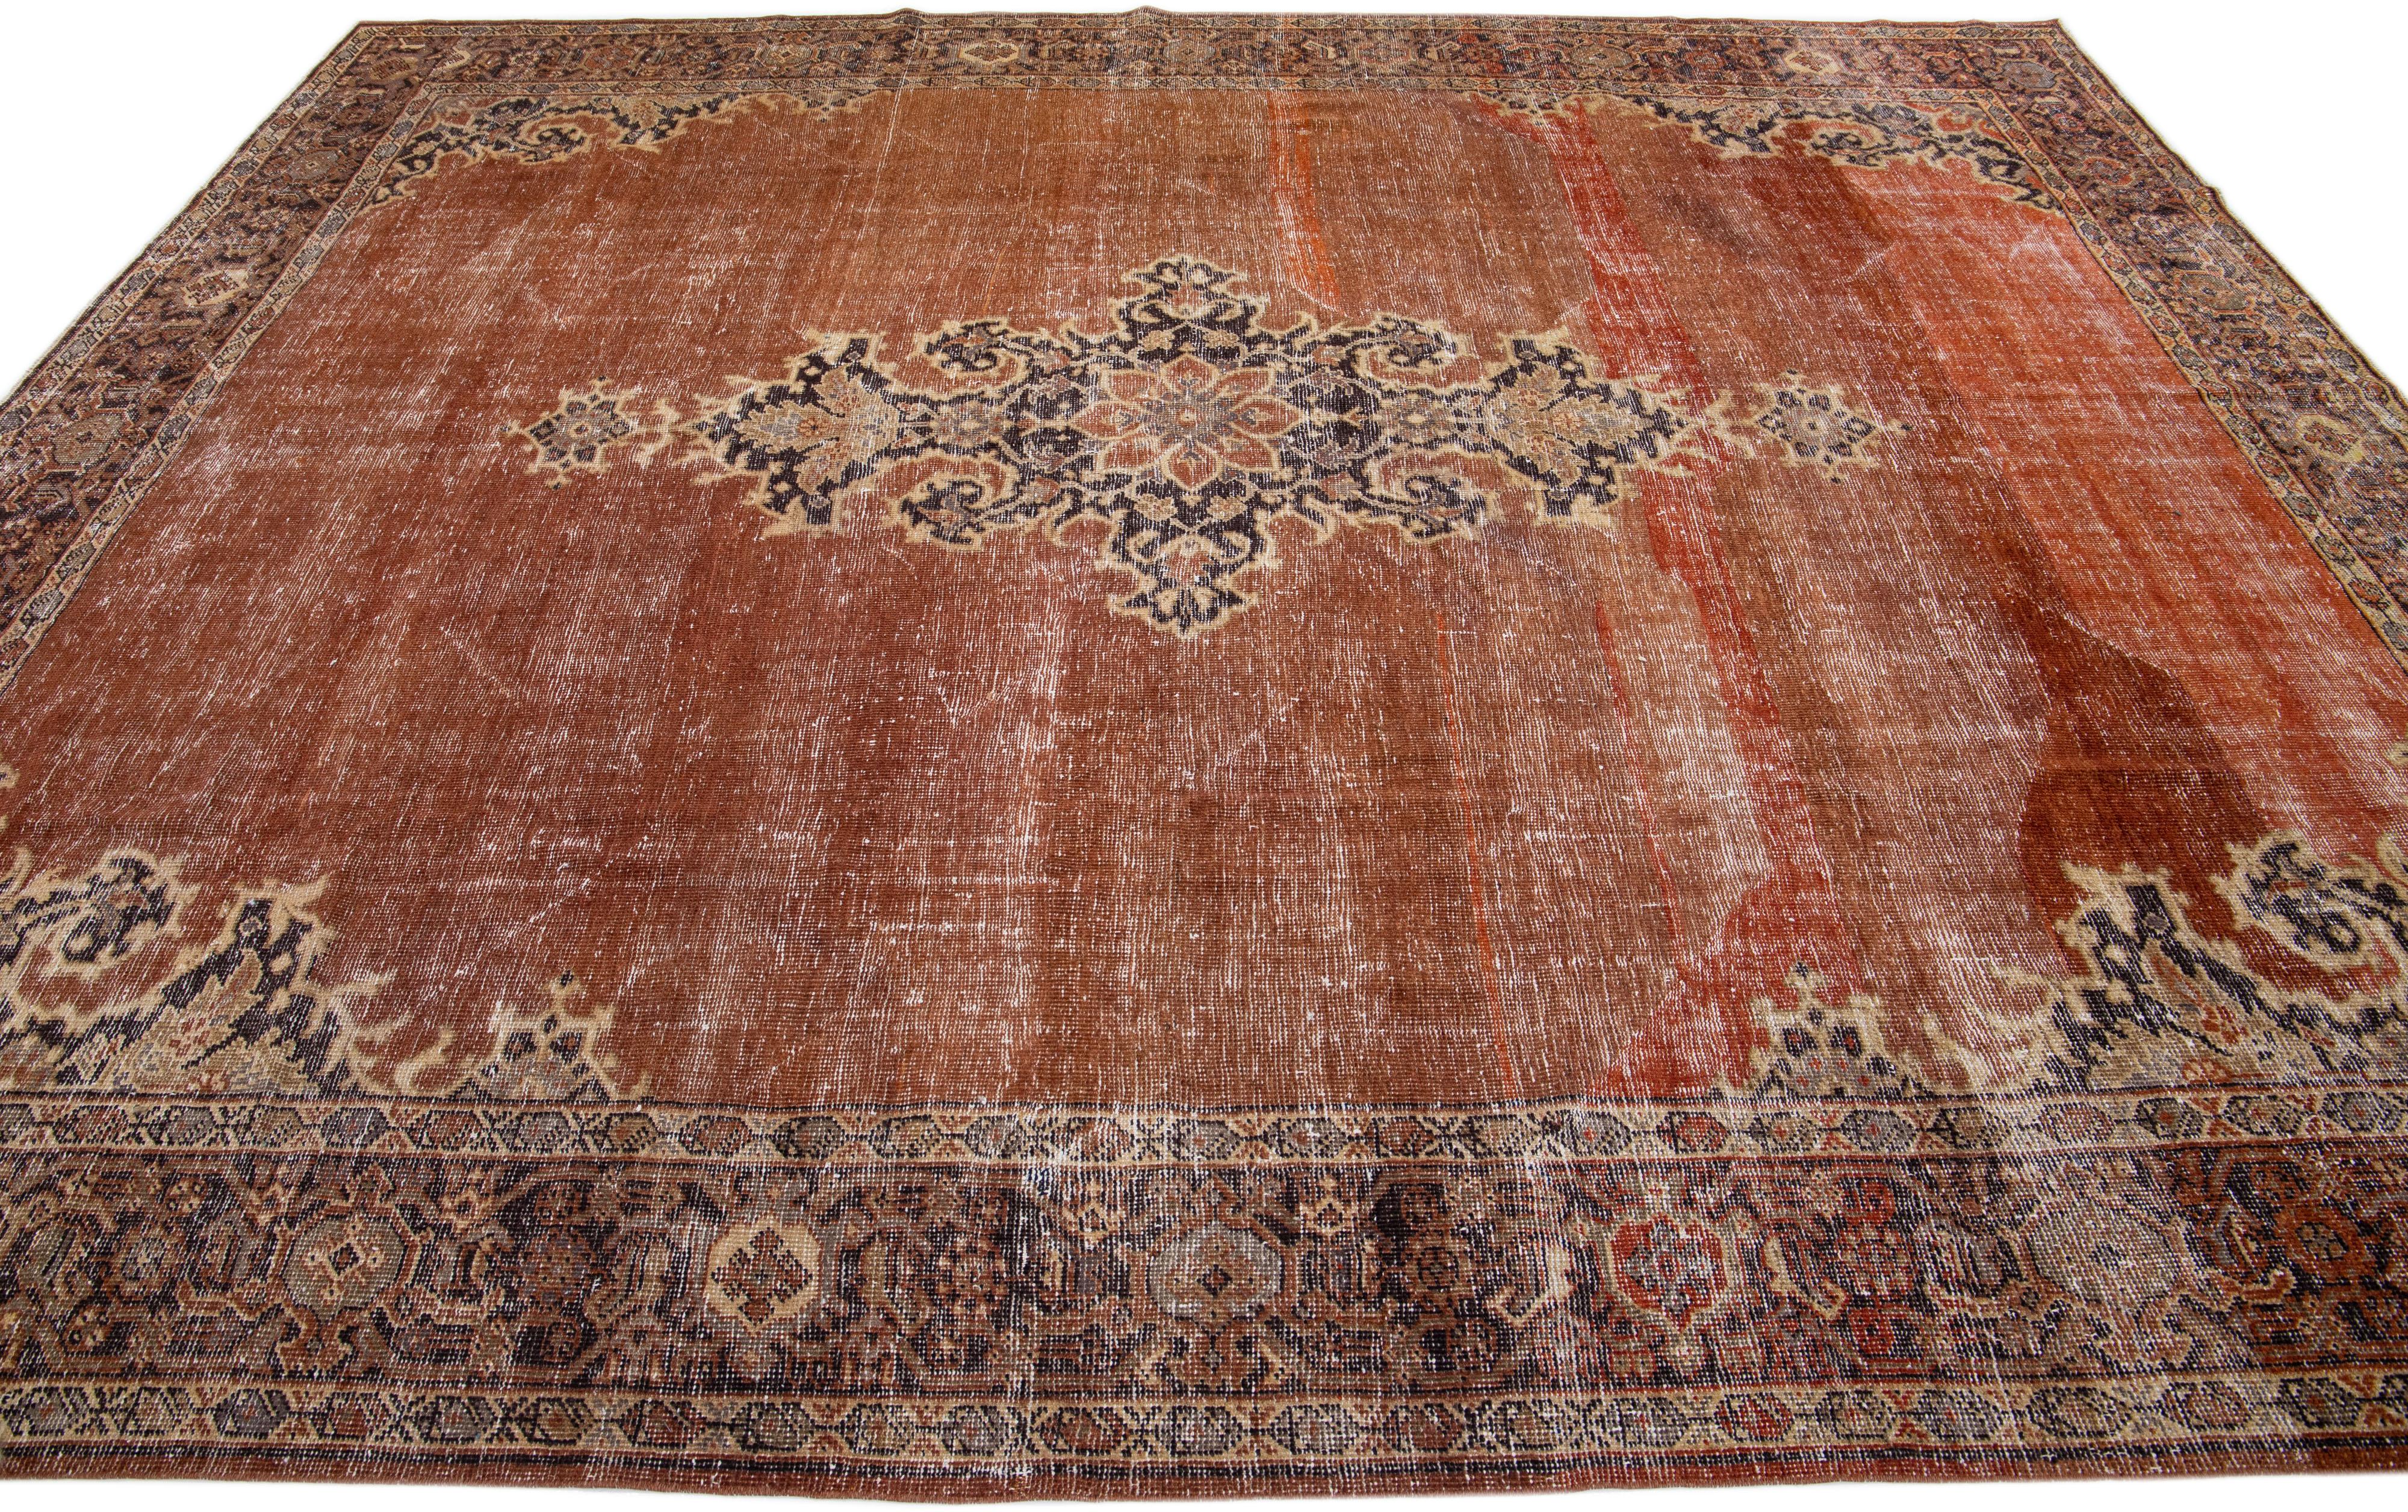 Persian Handmade Antique Tabriz Medallion Wool Rug With Copper Color Field In Good Condition For Sale In Norwalk, CT